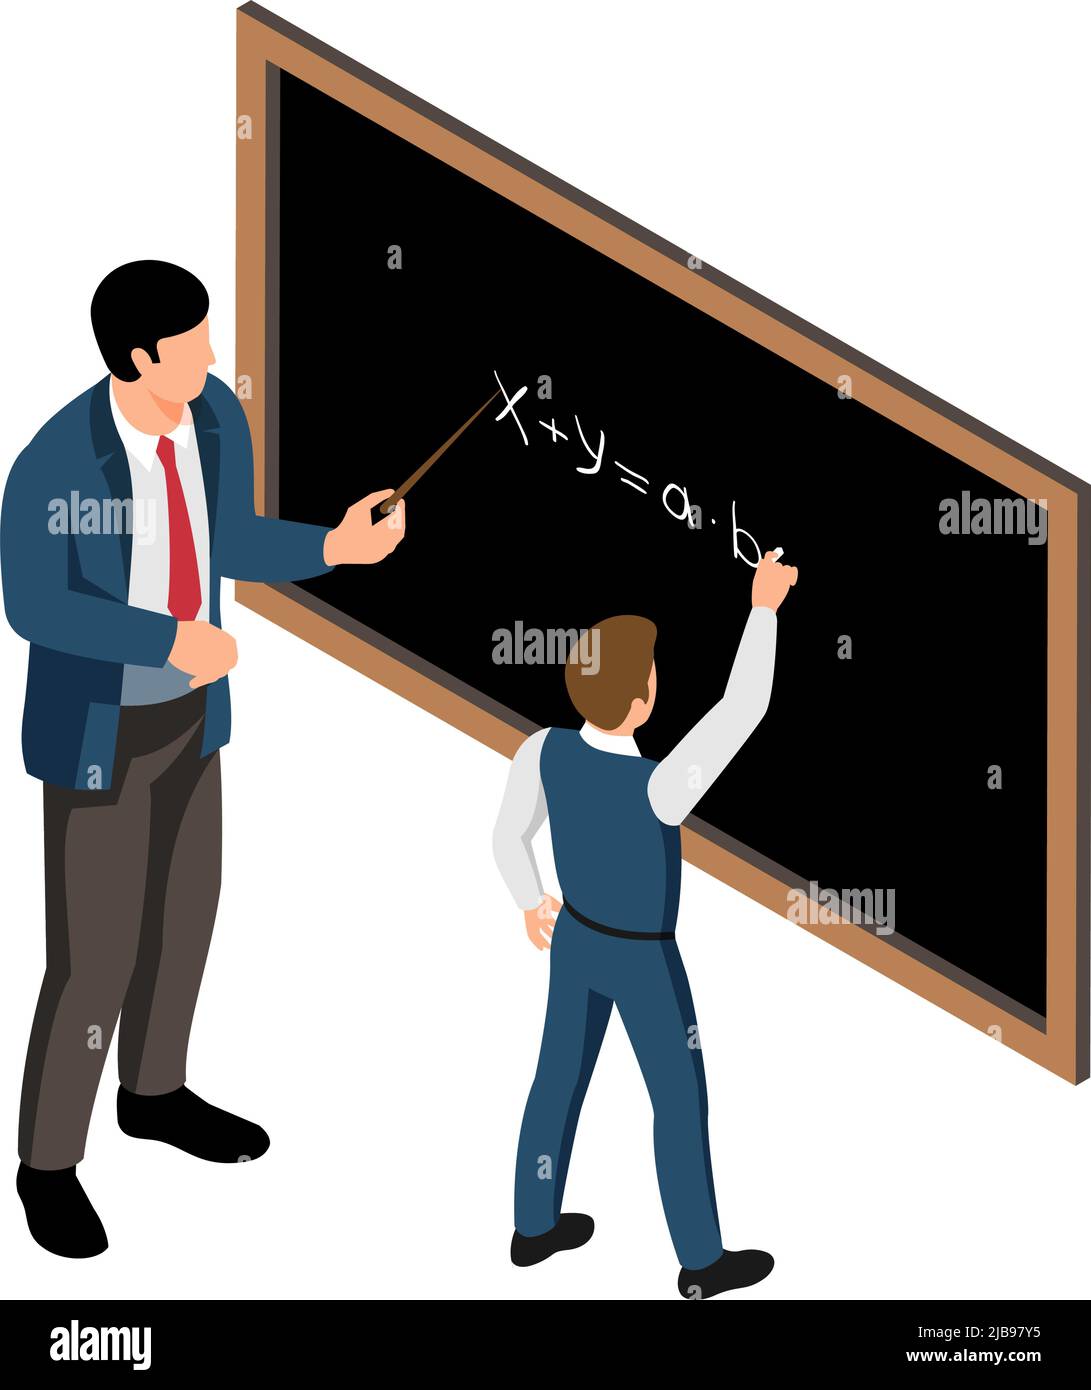 Isometric school lesson icon with male teacher and pupil doing sums on board vector illustration Stock Vector